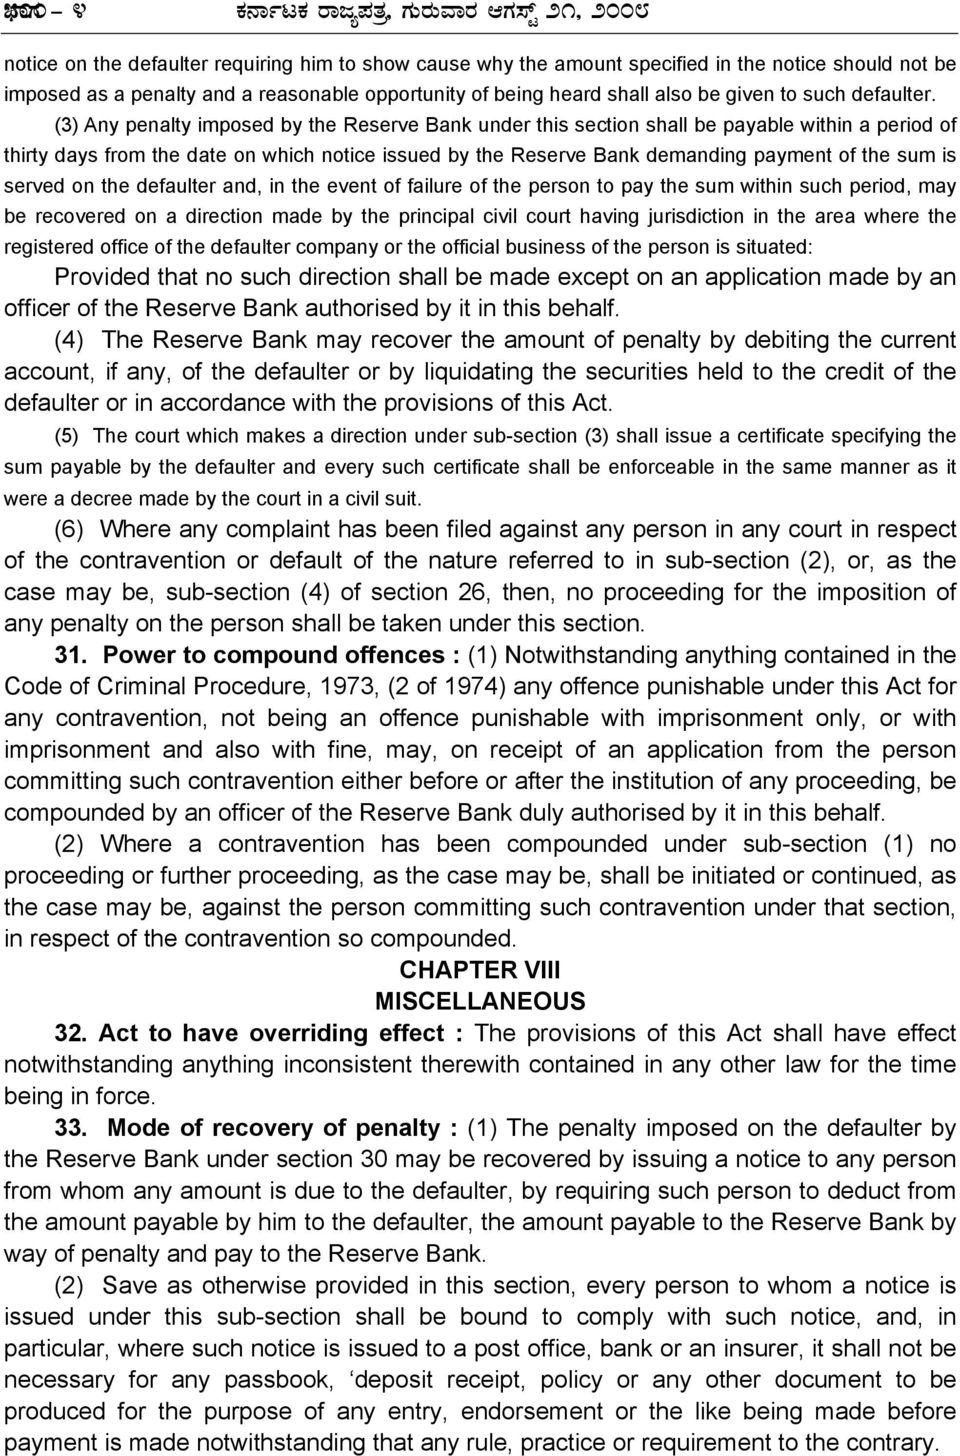 (3) Any penalty imposed by the Reserve Bank under this section shall be payable within a period of thirty days from the date on which notice issued by the Reserve Bank demanding payment of the sum is